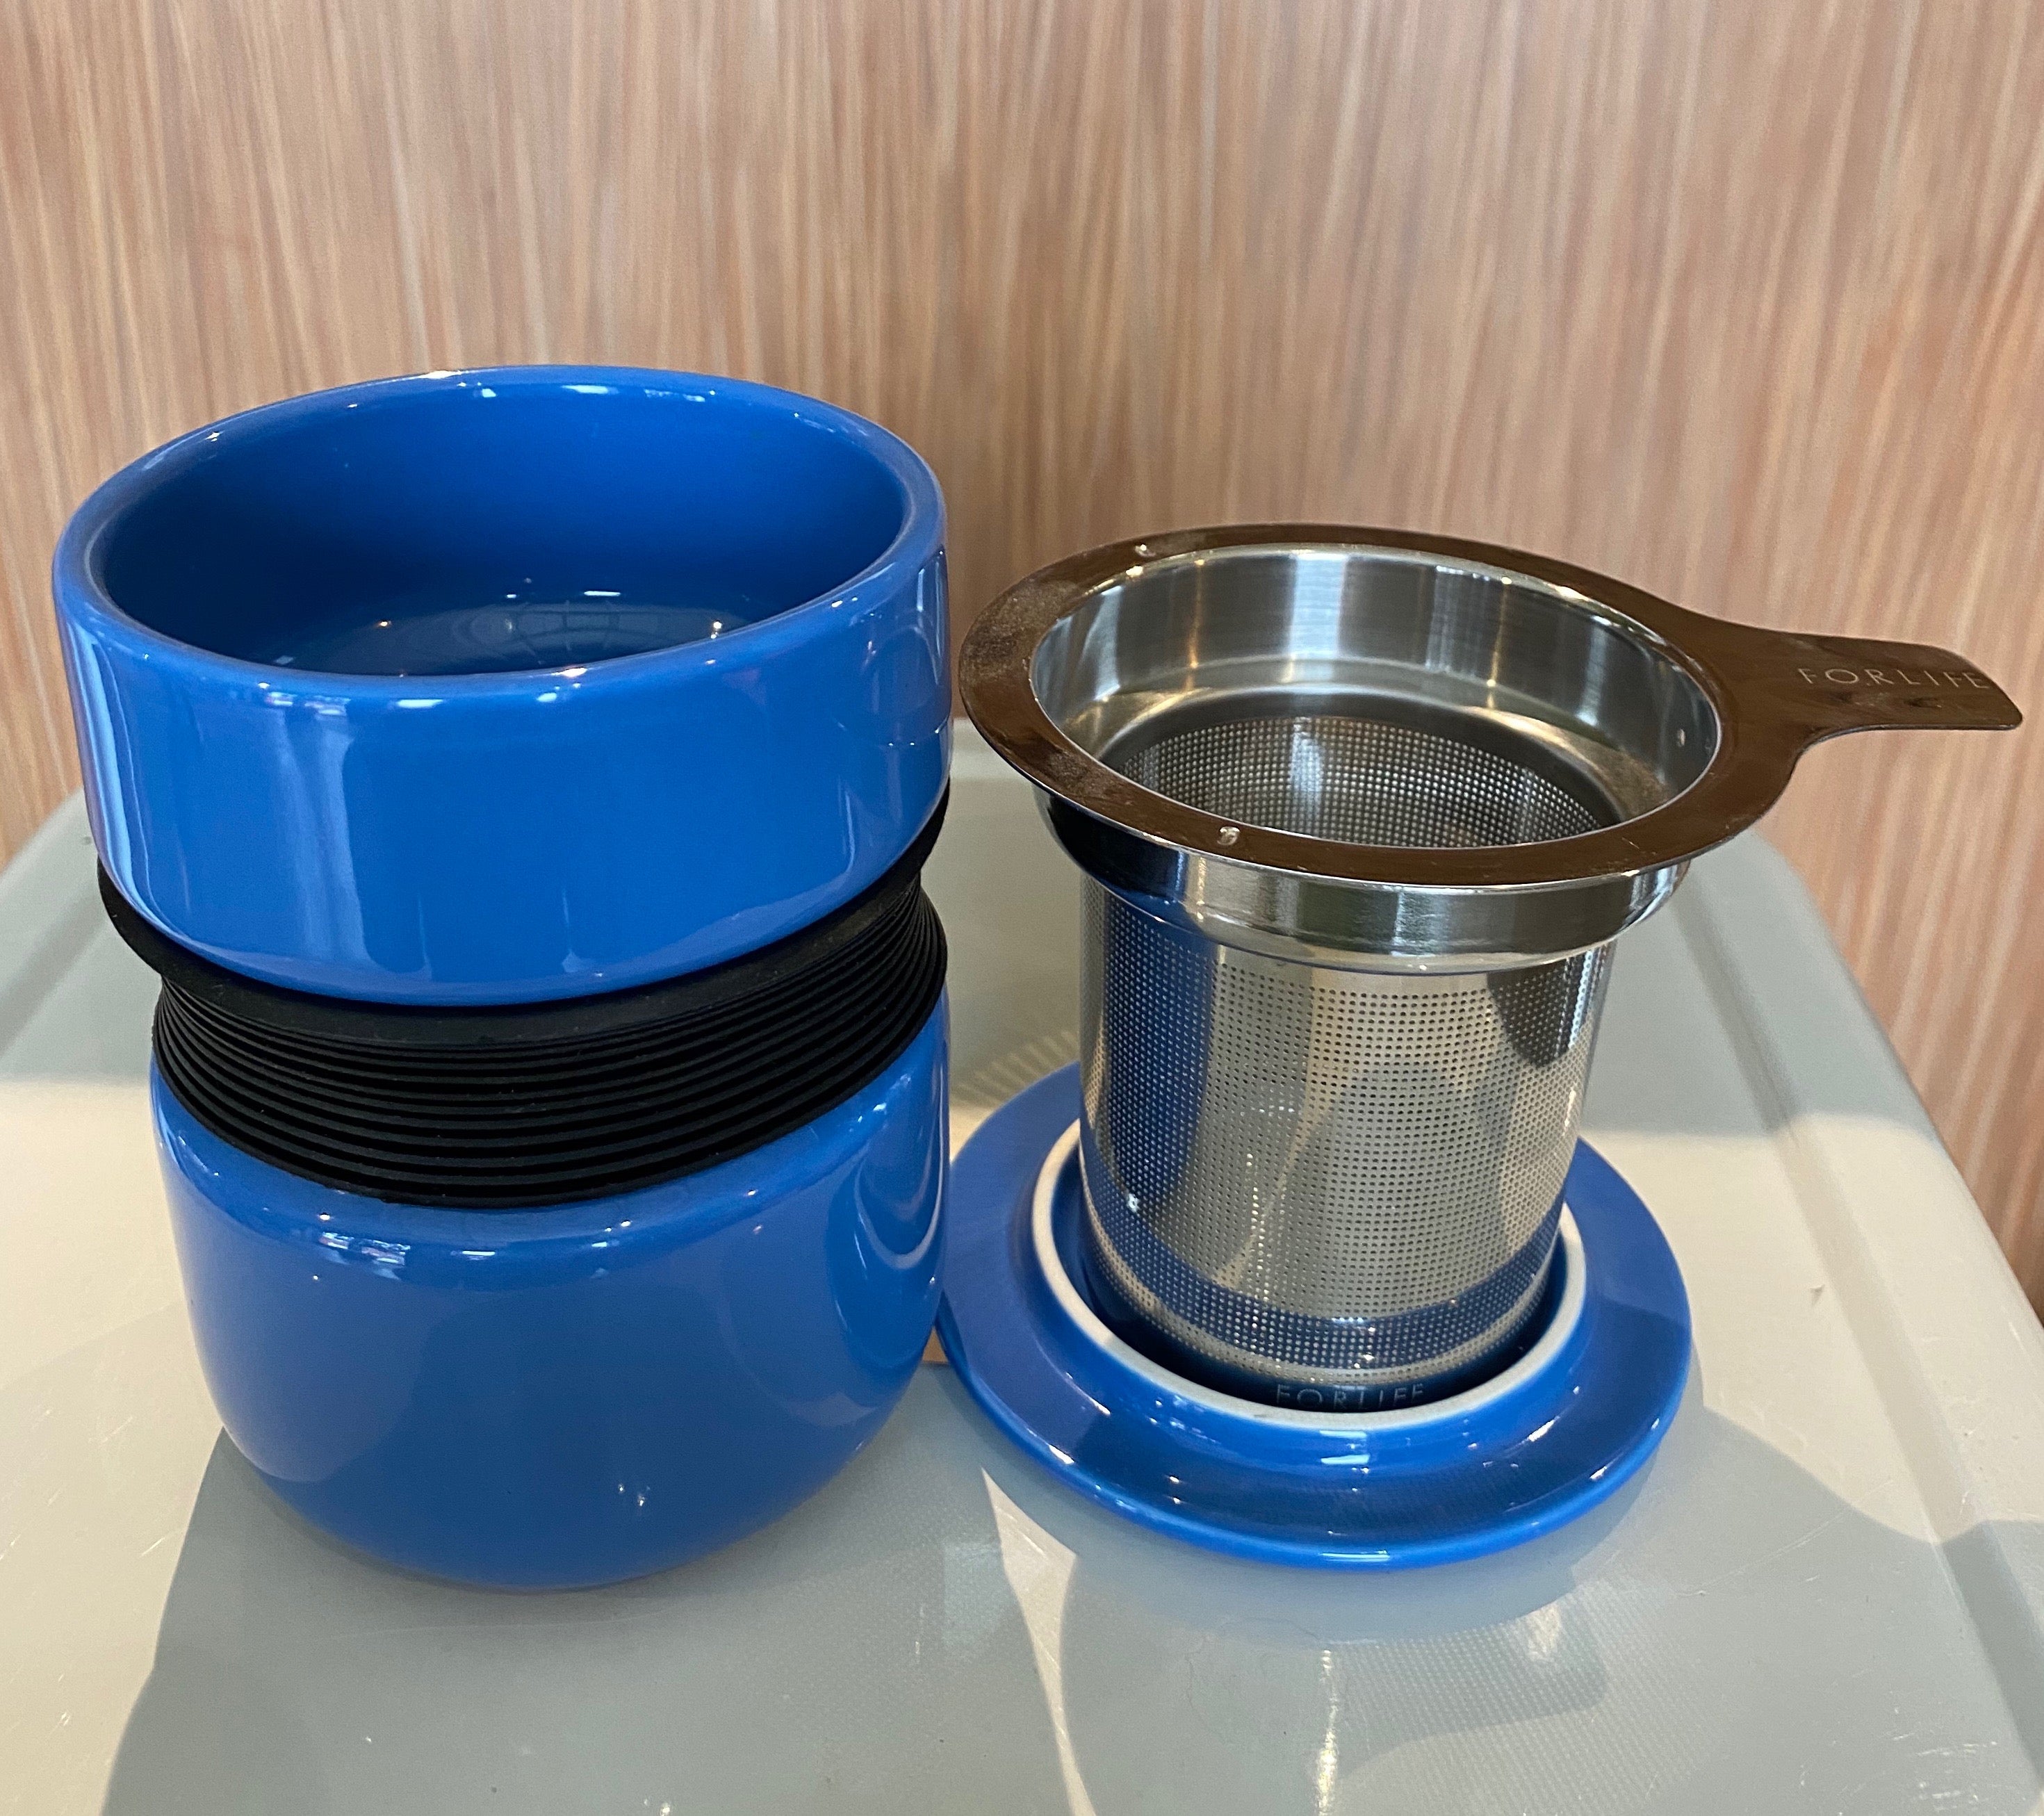 Marine blue Asian style tea mug with infuser & lid, For Life brand